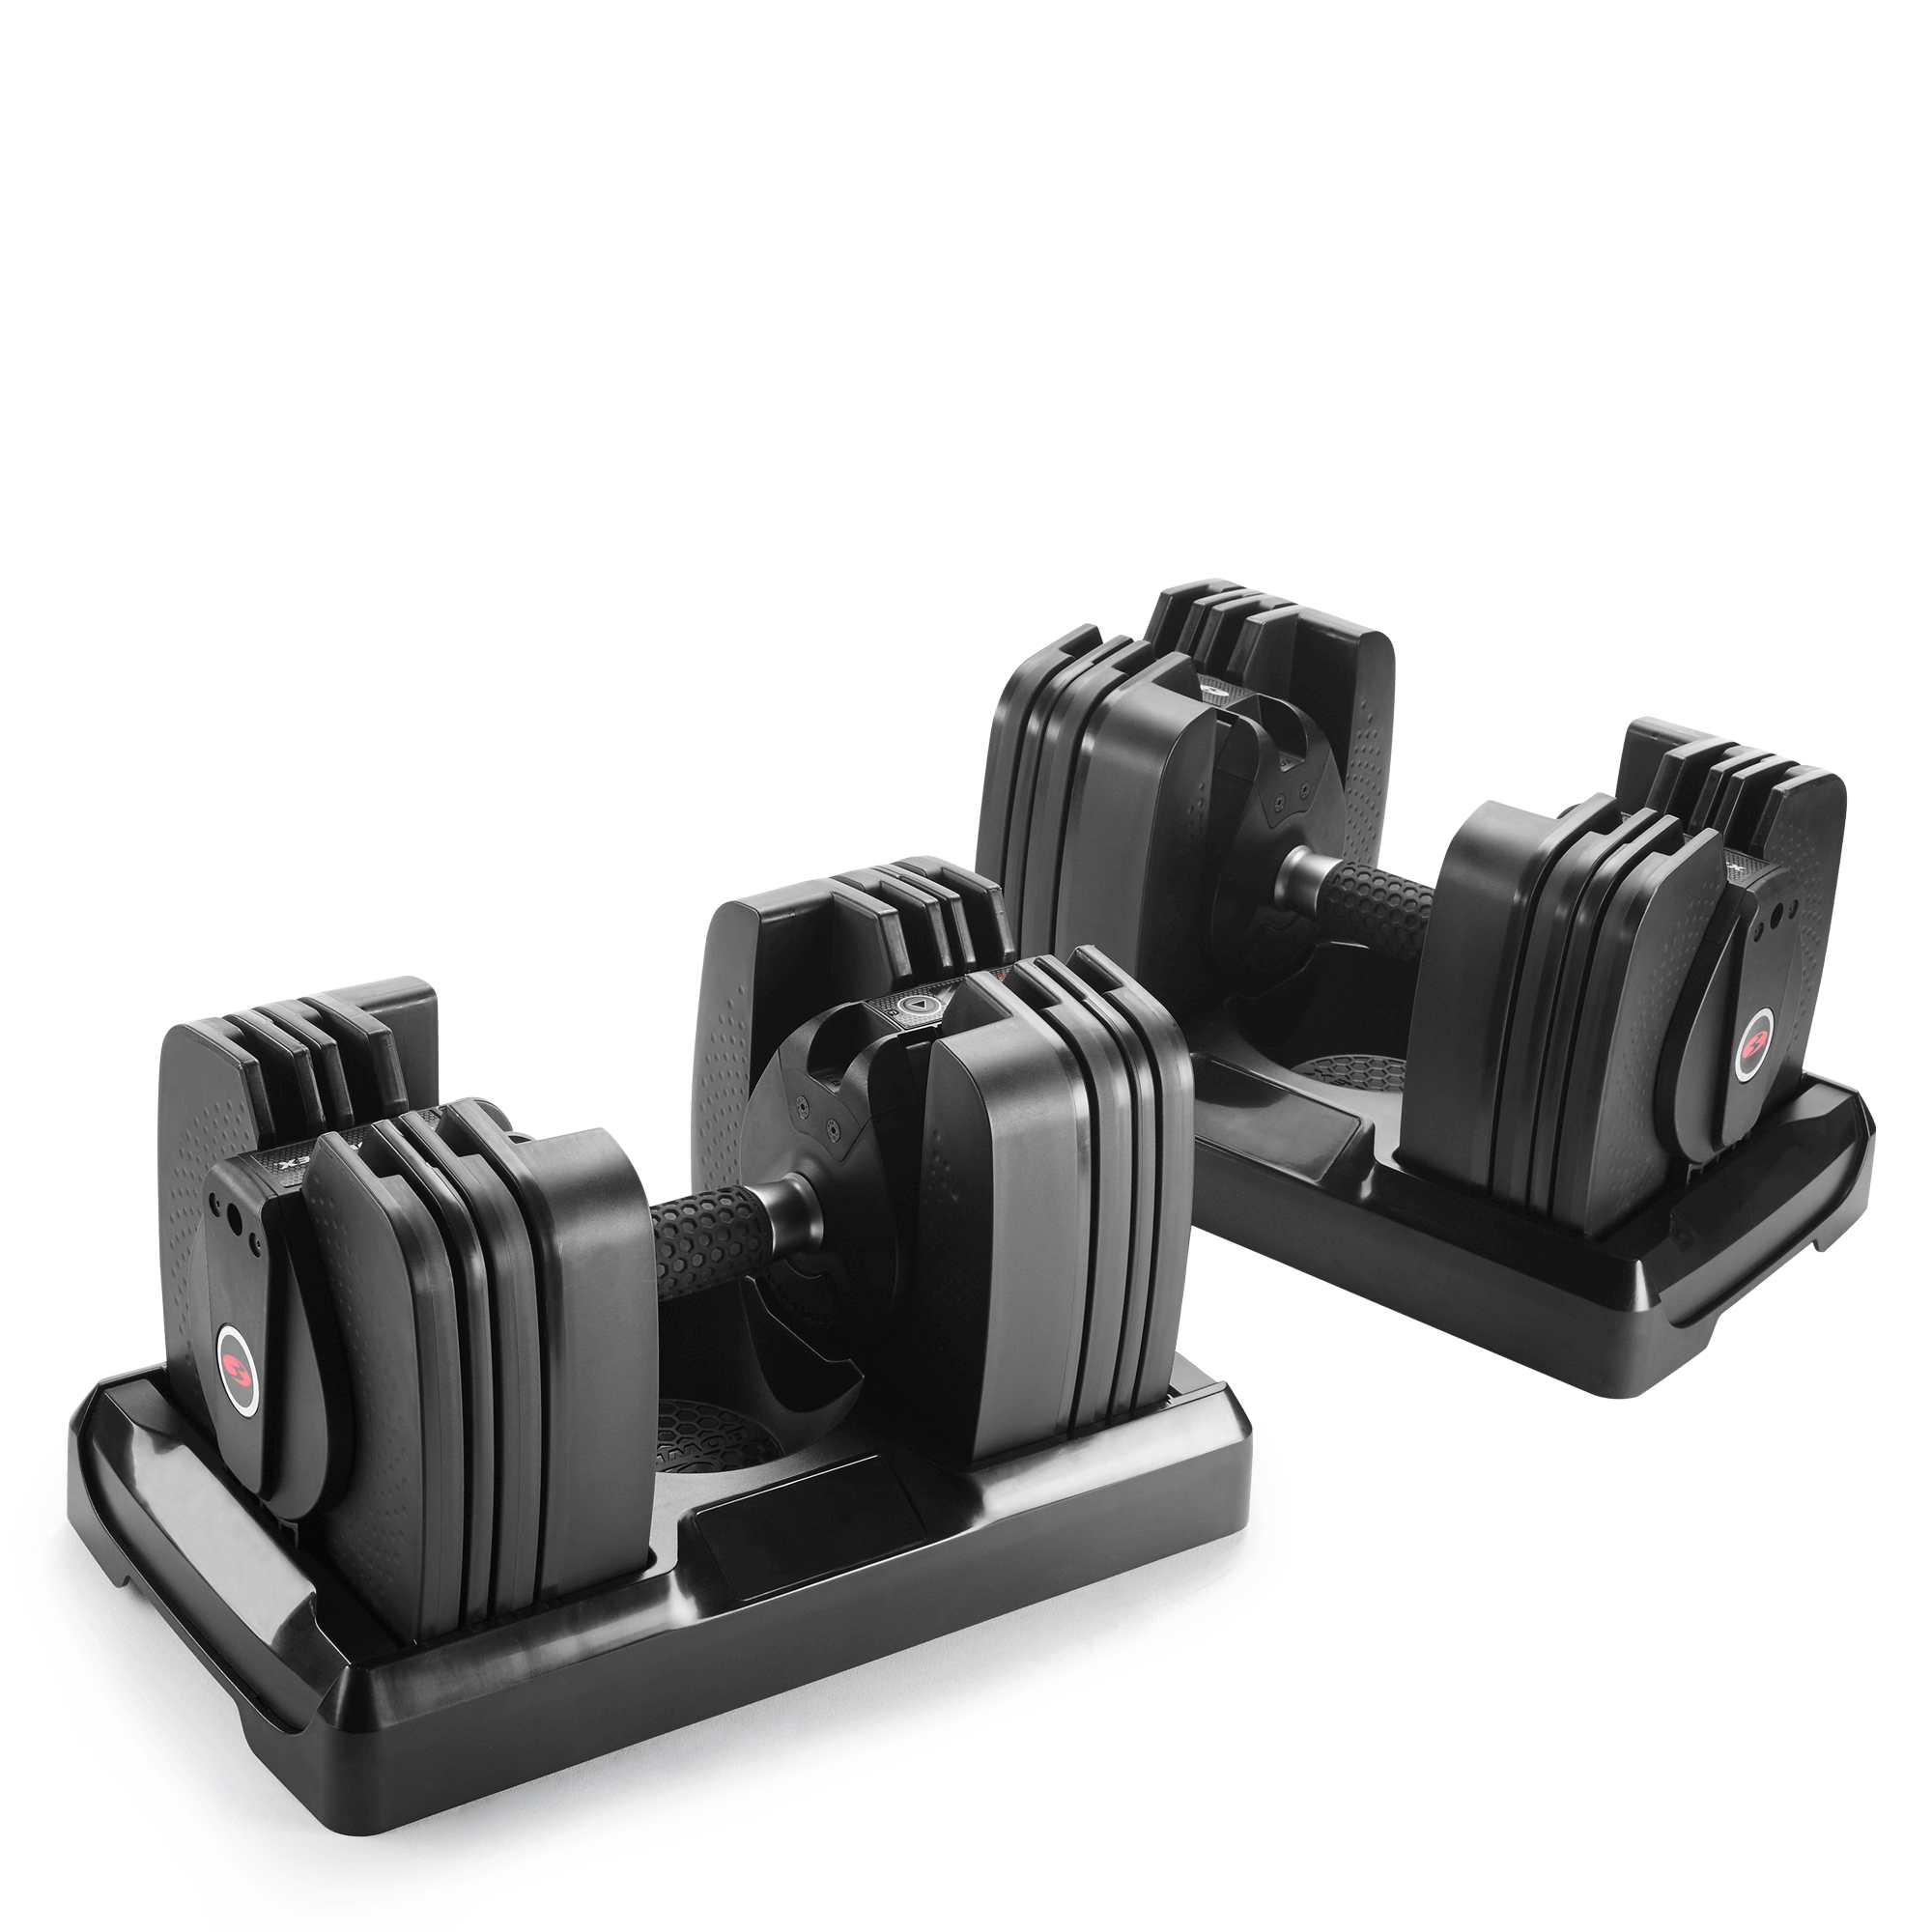 Father’s Day Giveaway: BowFlex SelectTech 560 Dumbbell